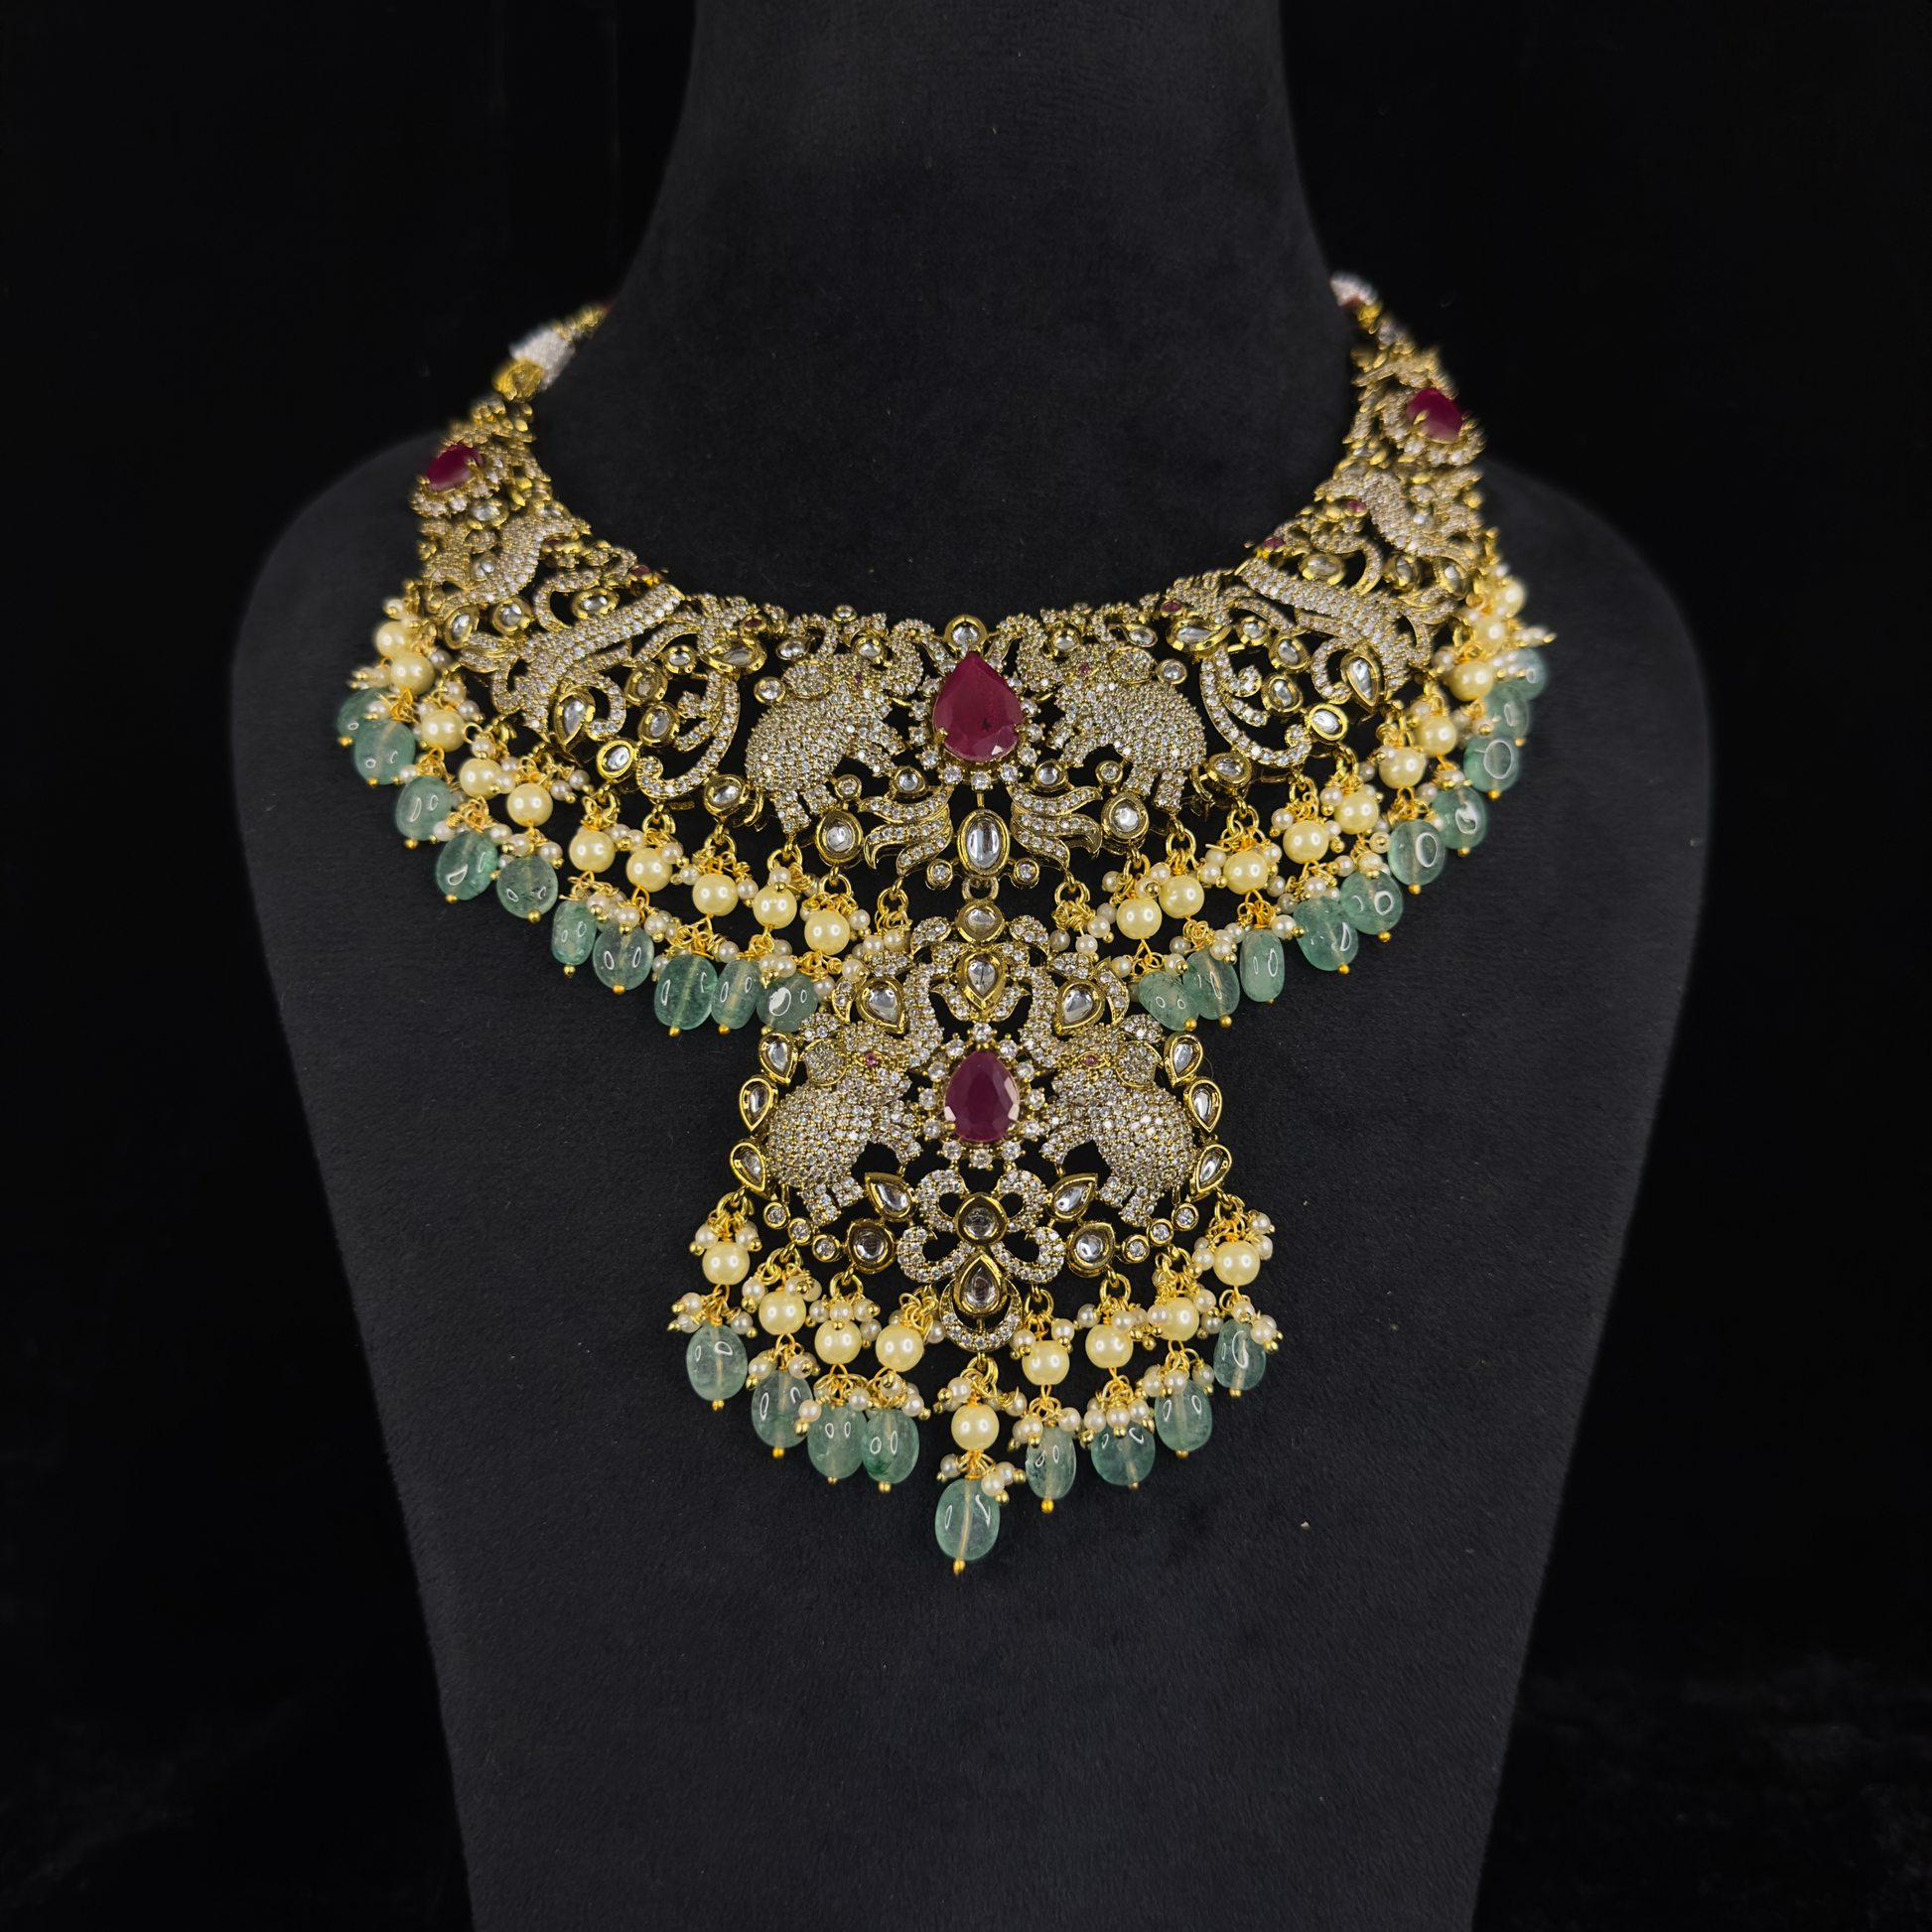 Beautiful Victorian Necklace Set with zircon, moissanite polki stones, elephant & peacock motifs, pearls, and beads, including matching earrings. Available in a red colour variant.